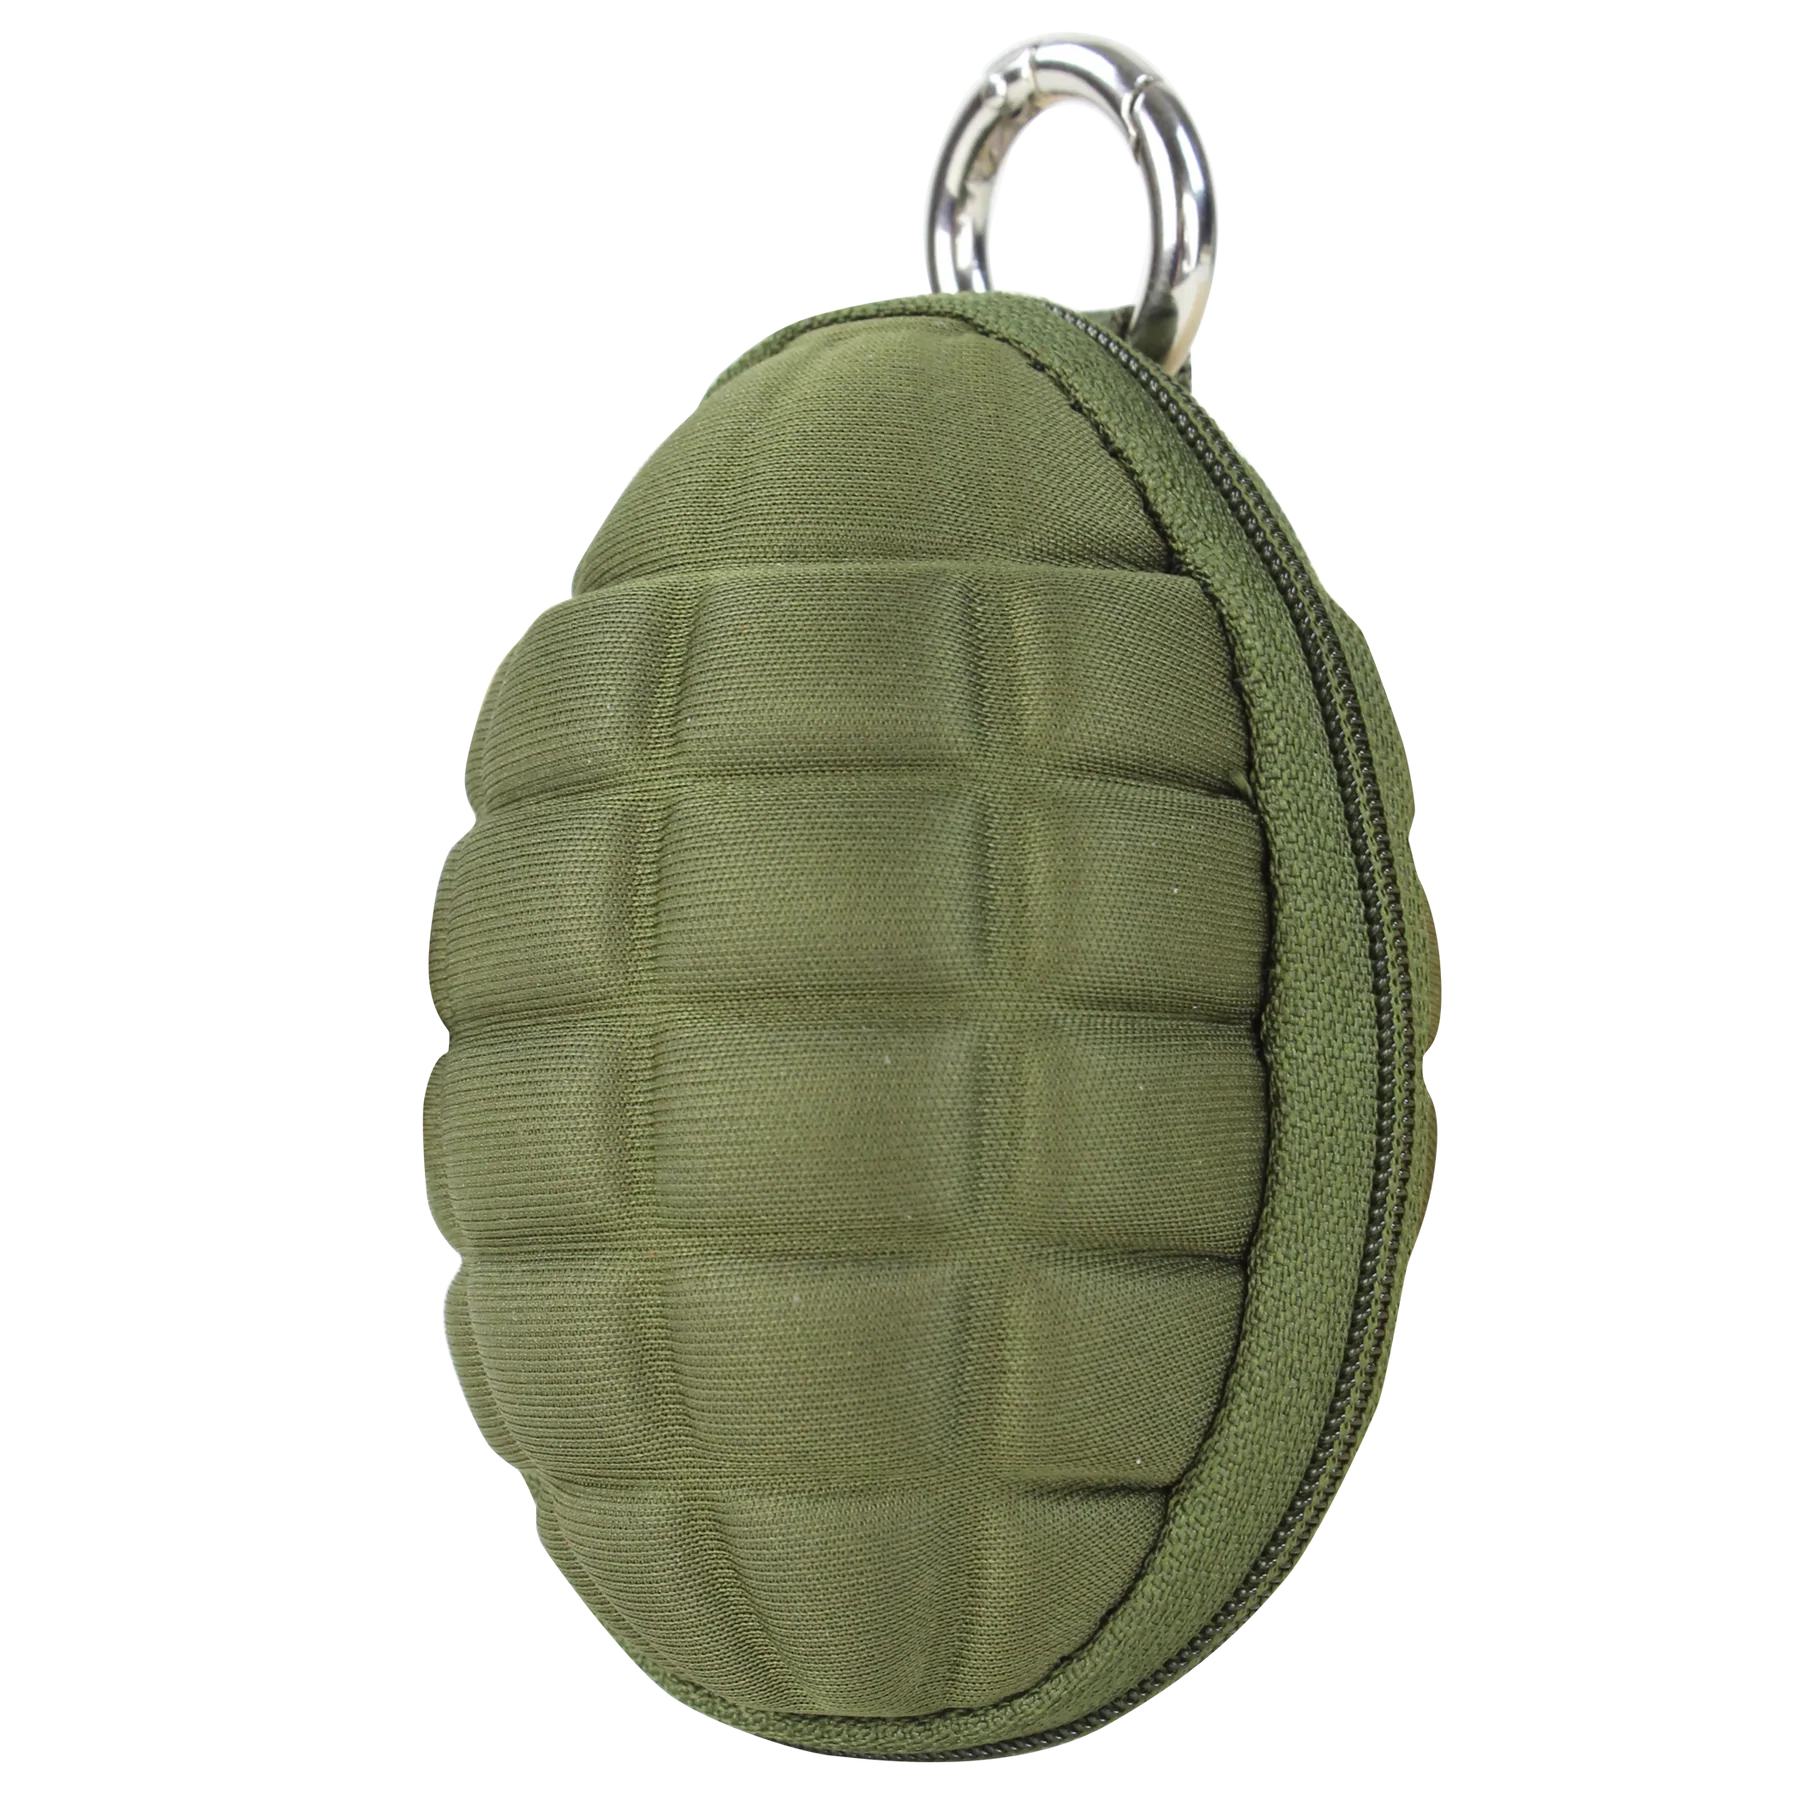 Condor Grenade Keychain Pouch – Olive Drab